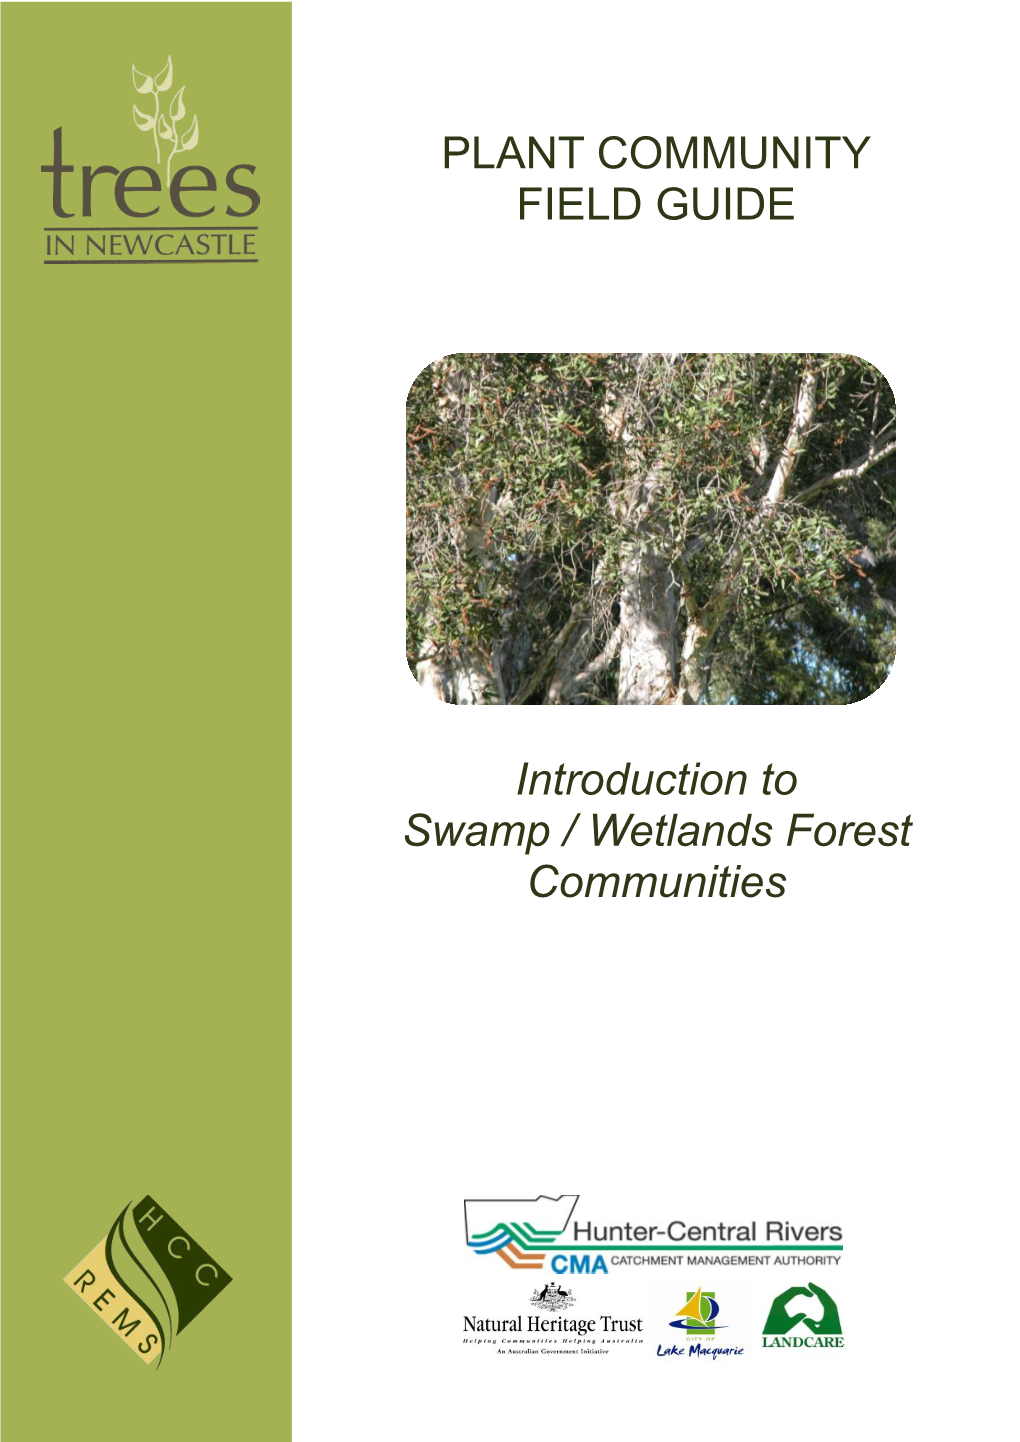 PLANT COMMUNITY FIELD GUIDE Introduction to Swamp / Wetlands Forest Communities